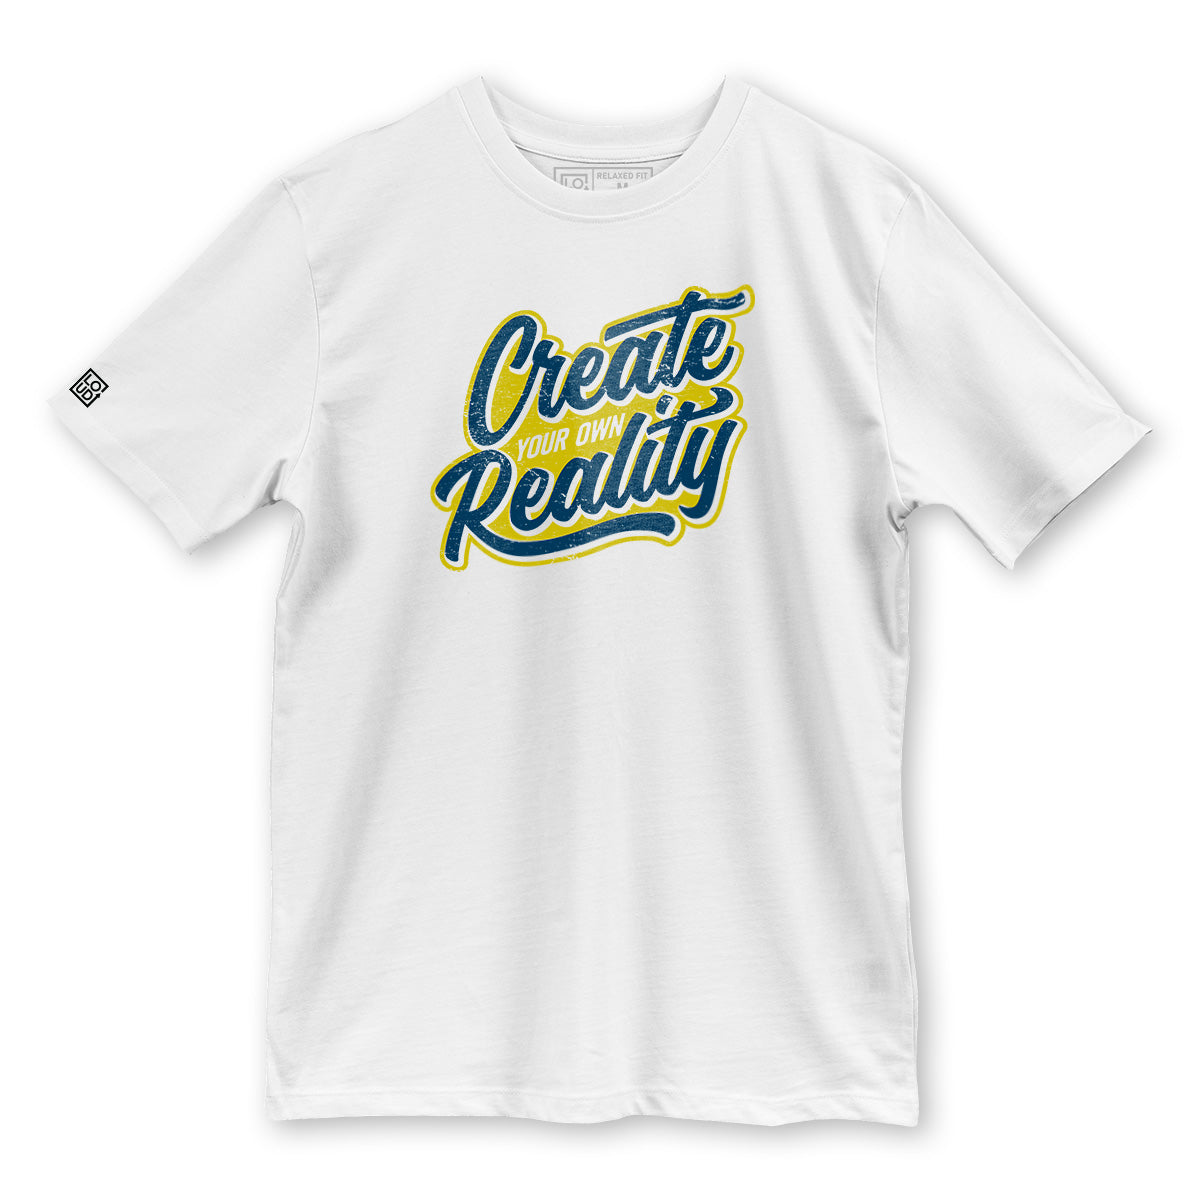 Unisex T-shirt "Create Your Own Reality"